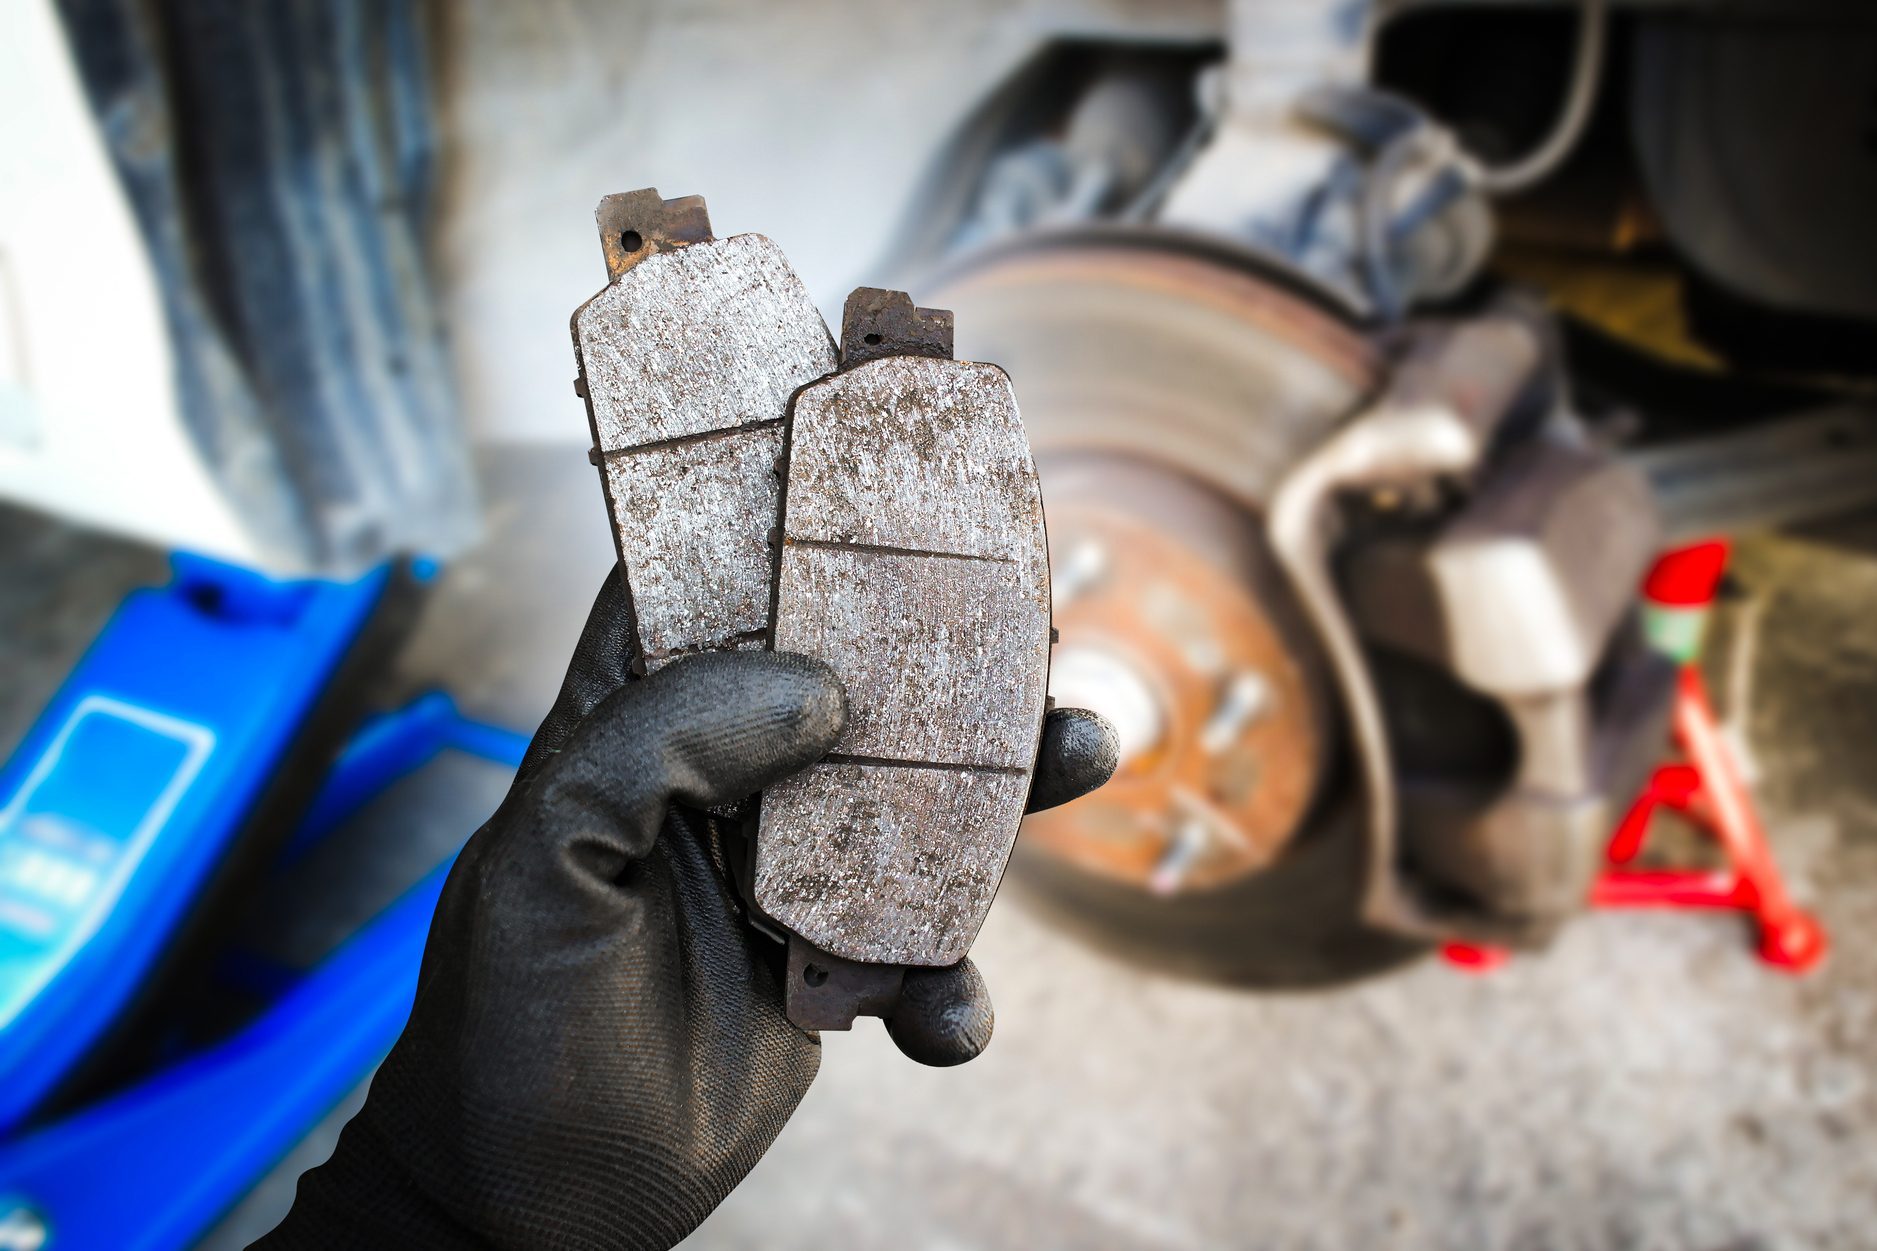 Used car brake pads in the hands of a mechanic